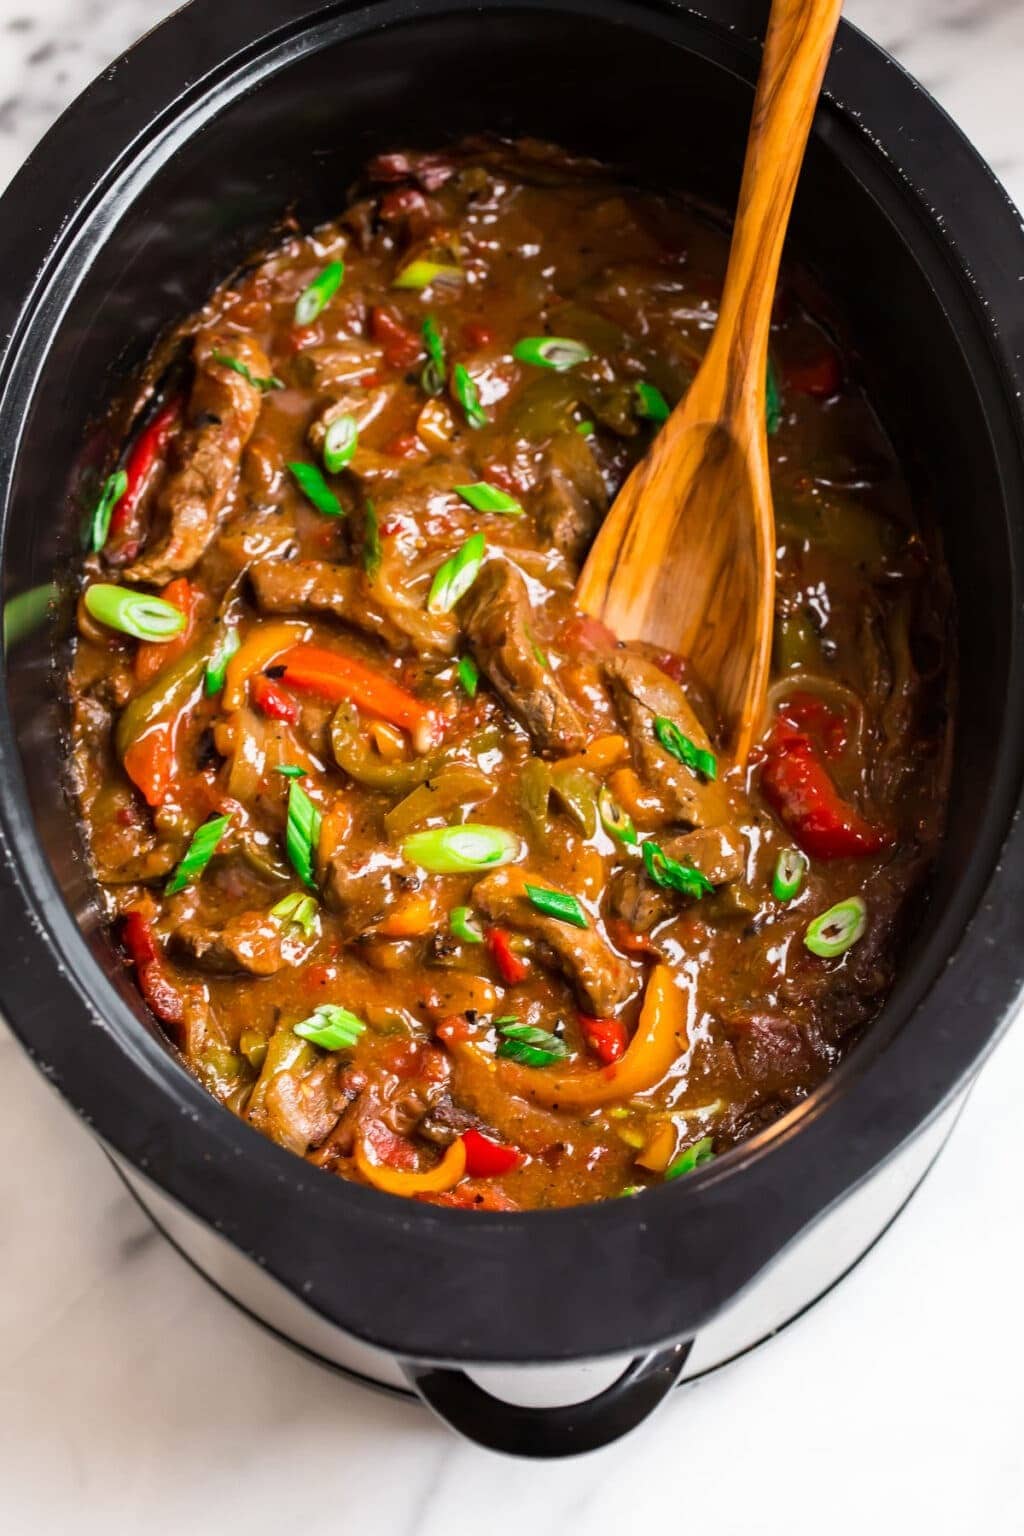 Crockpot Pepper Steak with bell peppers, diced tomatoes and green onions